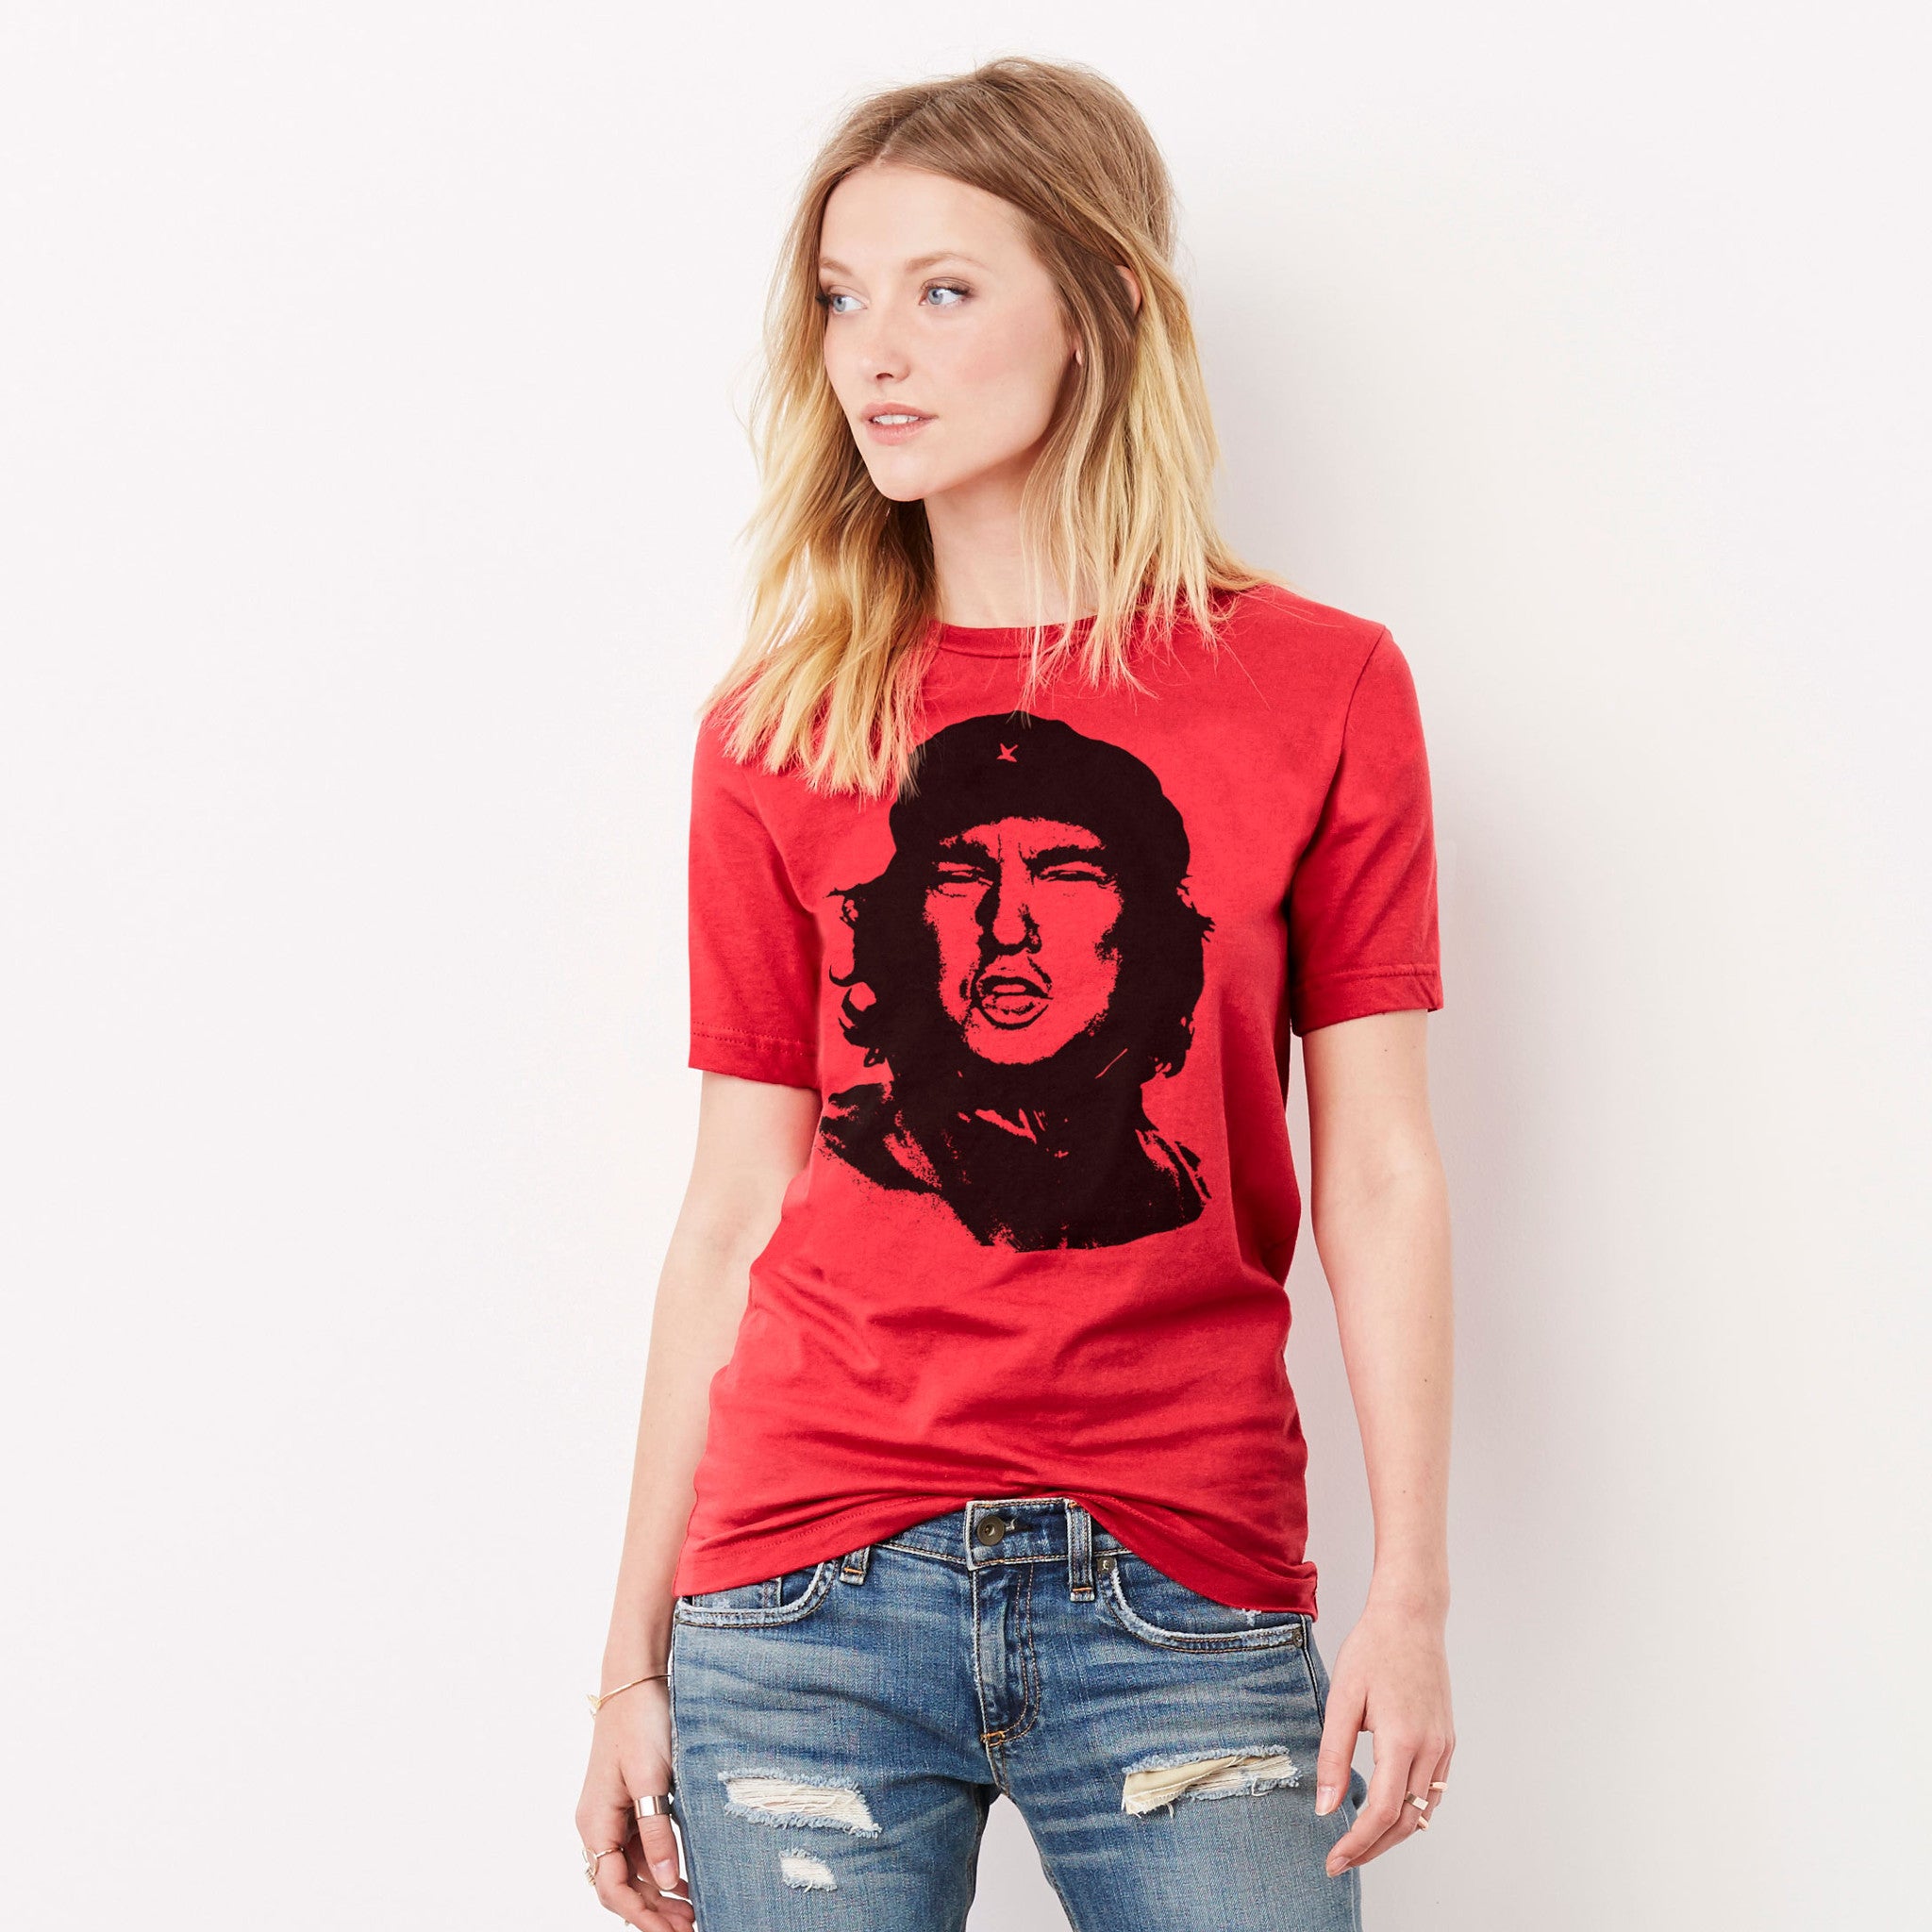 Che Guevara Donald Trump Essential T-Shirt for Sale by poopfactory